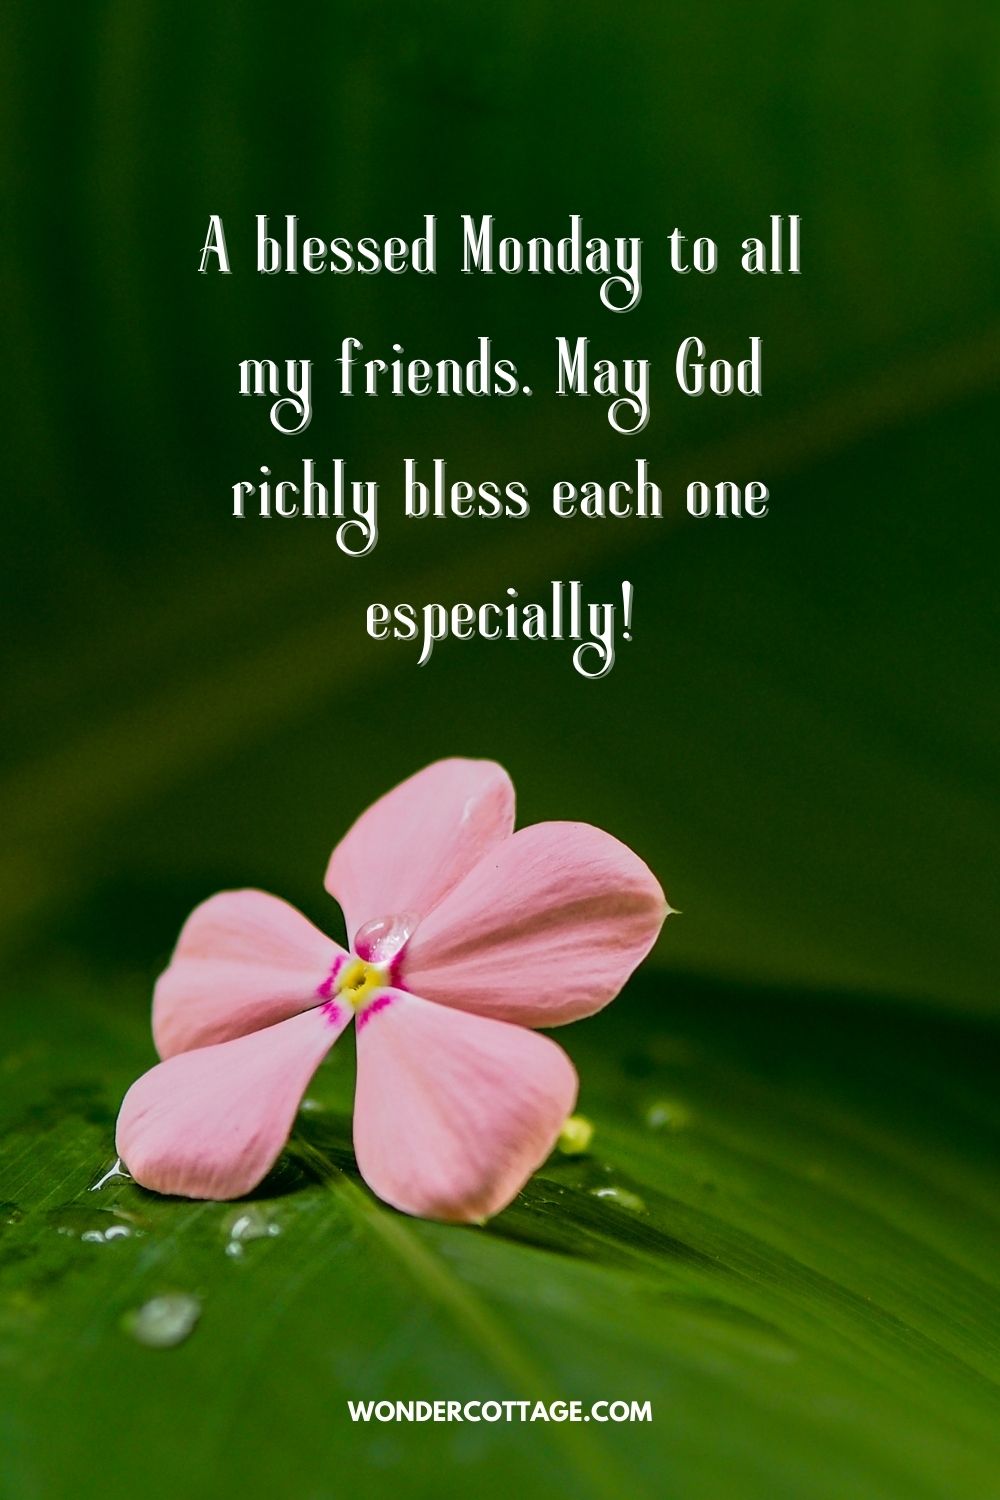 A blessed Monday to all my friends. May God richly bless each one especially!